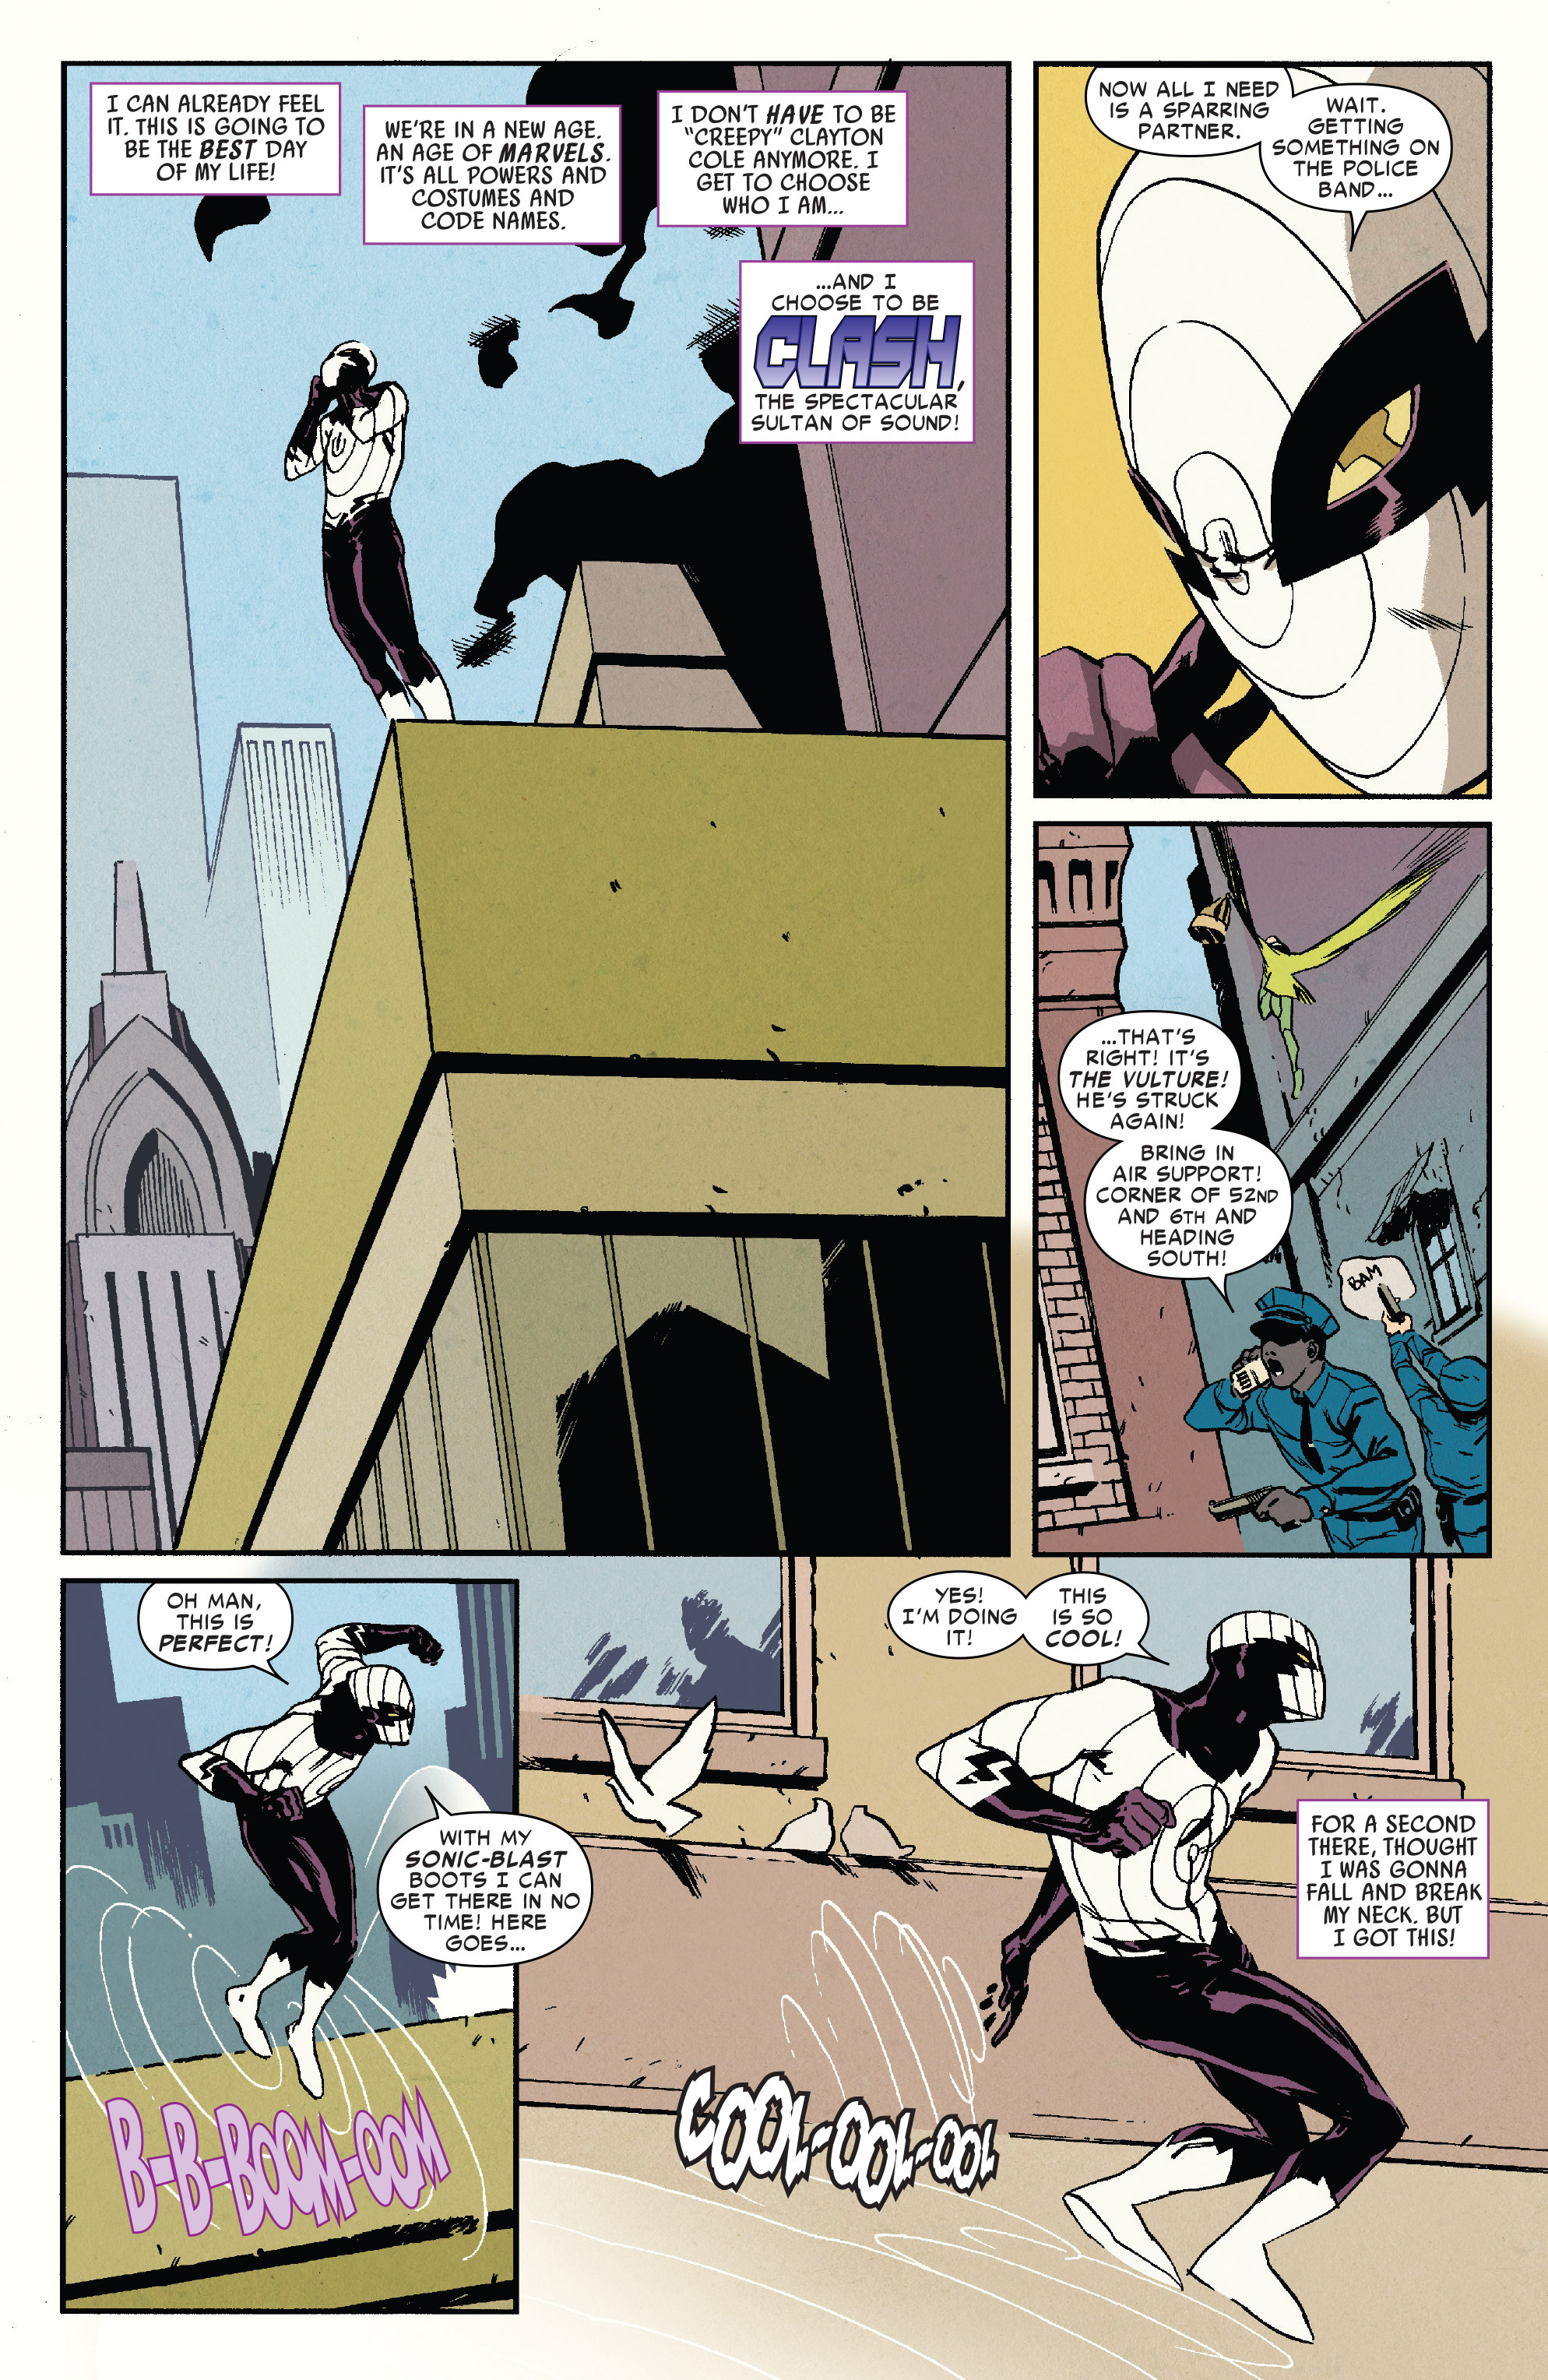 The Amazing Spider-Man (2014) issue 1.2 - Page 3